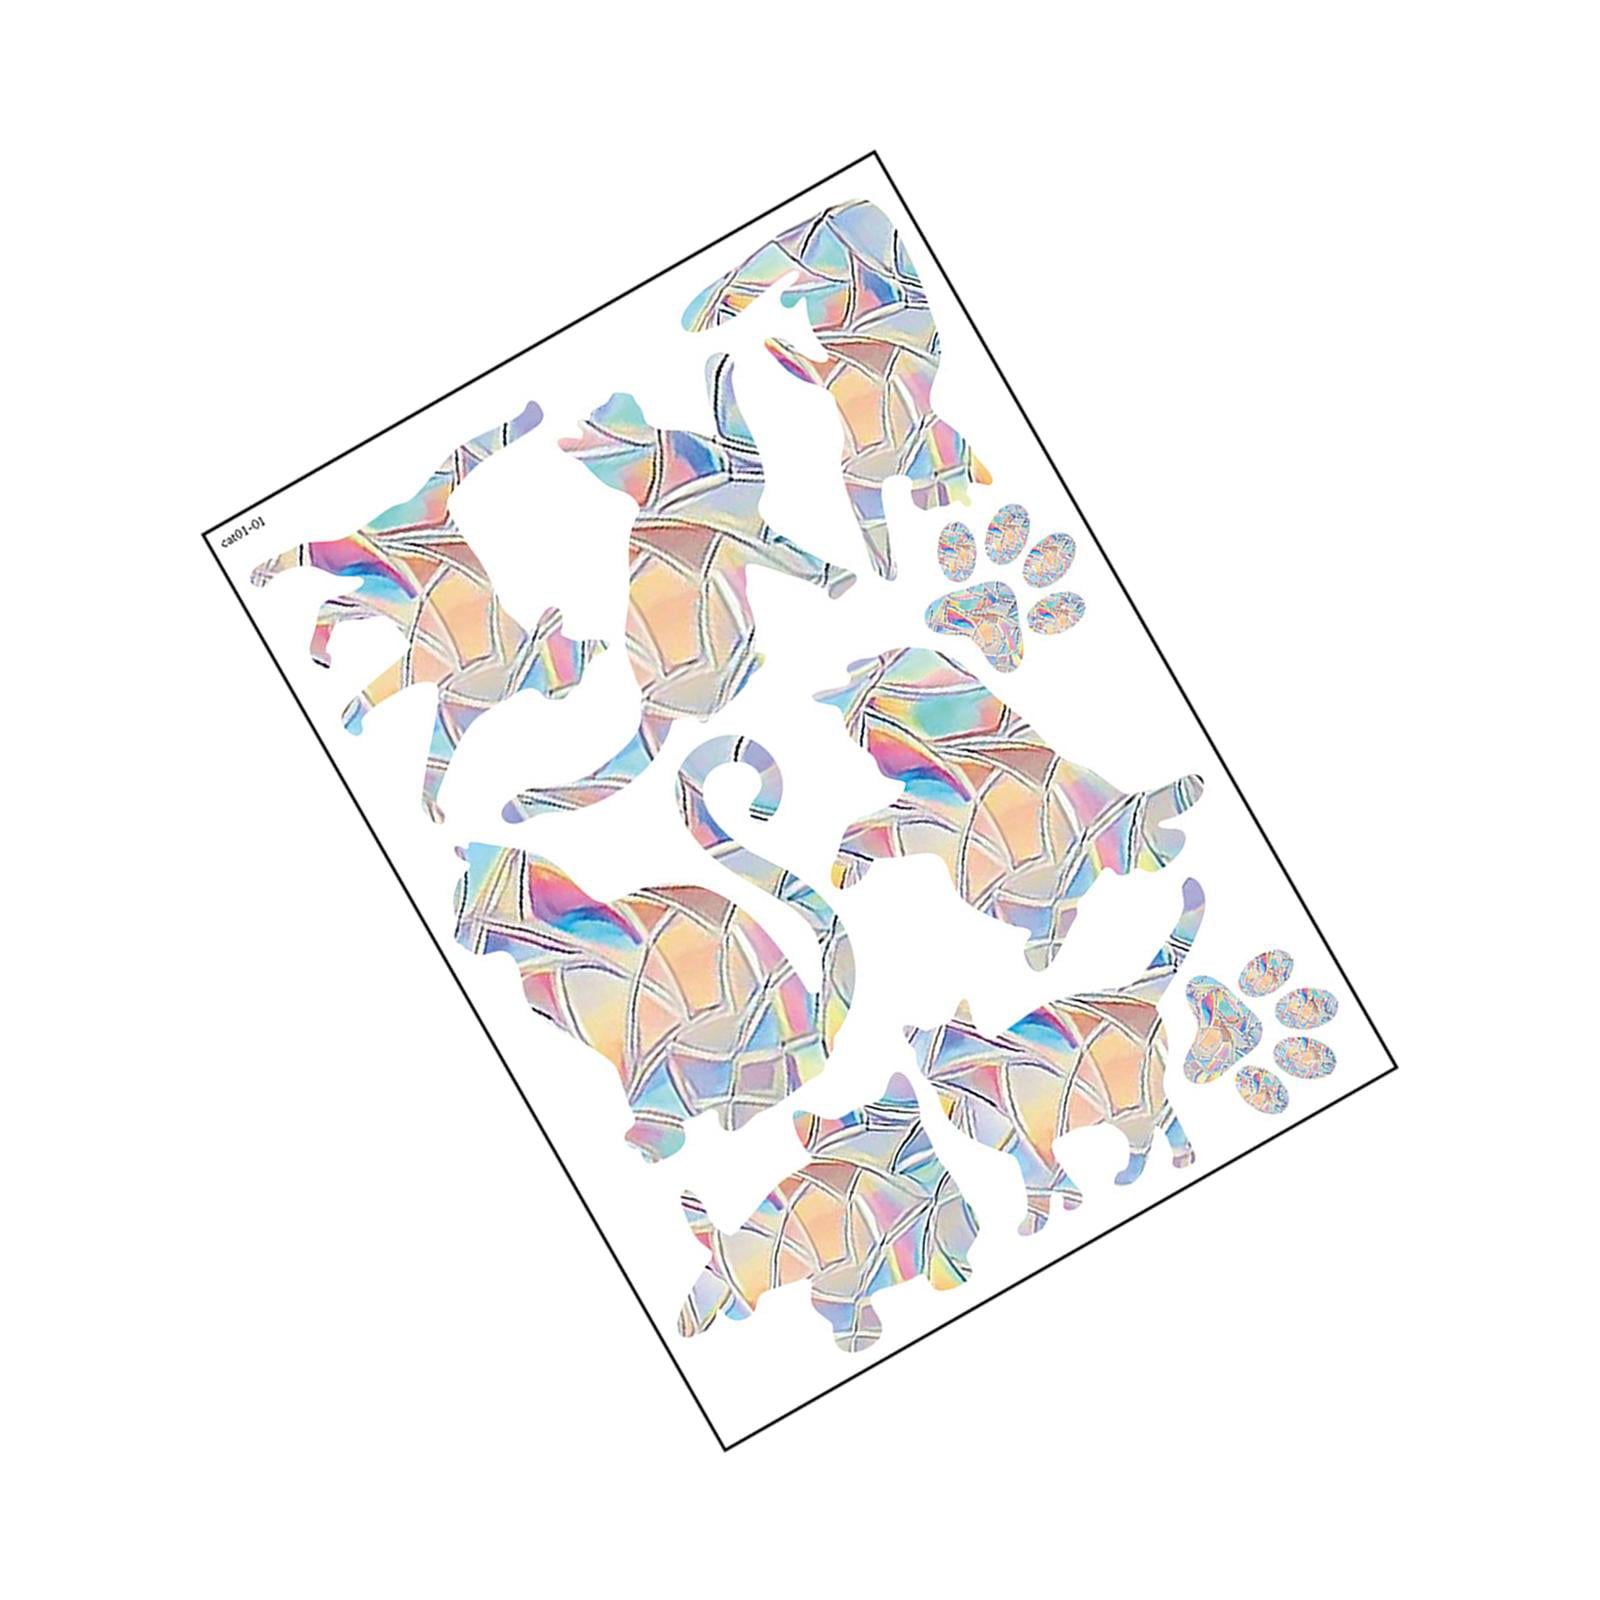  Rainbow Symphony- Rainbow Suncatcher Window Clings, 19  Assorted Gem Shaped Decals, Anti Collision Window Stickers for Birds, Made  in USA